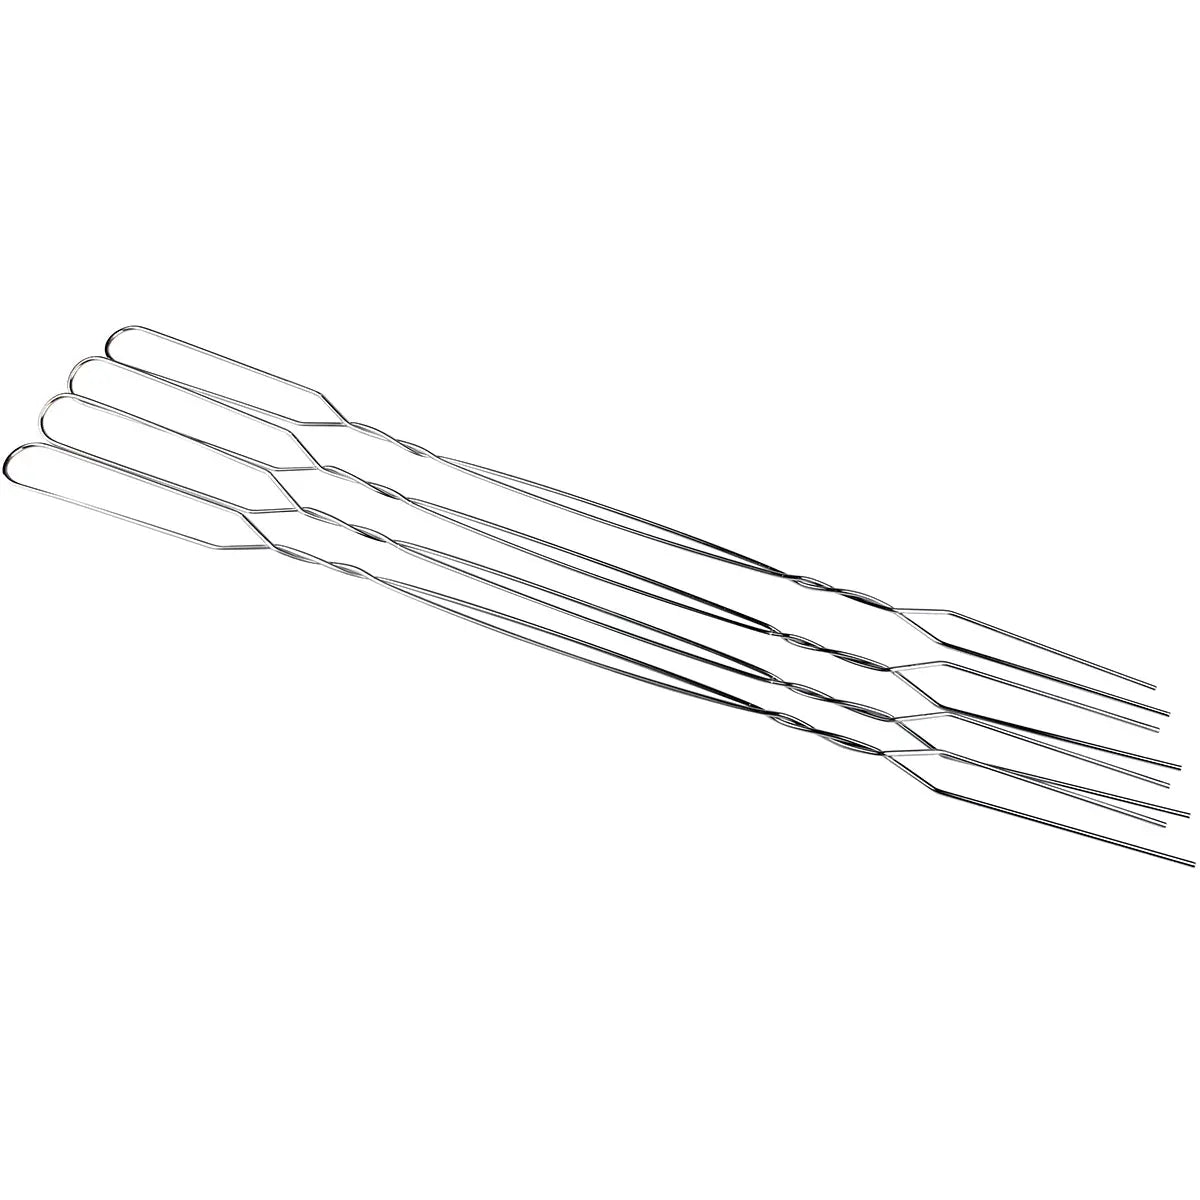 Coghlan's Toaster Forks (4 Pack), 20" Length for Toasting, Campfire Camping Tool Coghlan's